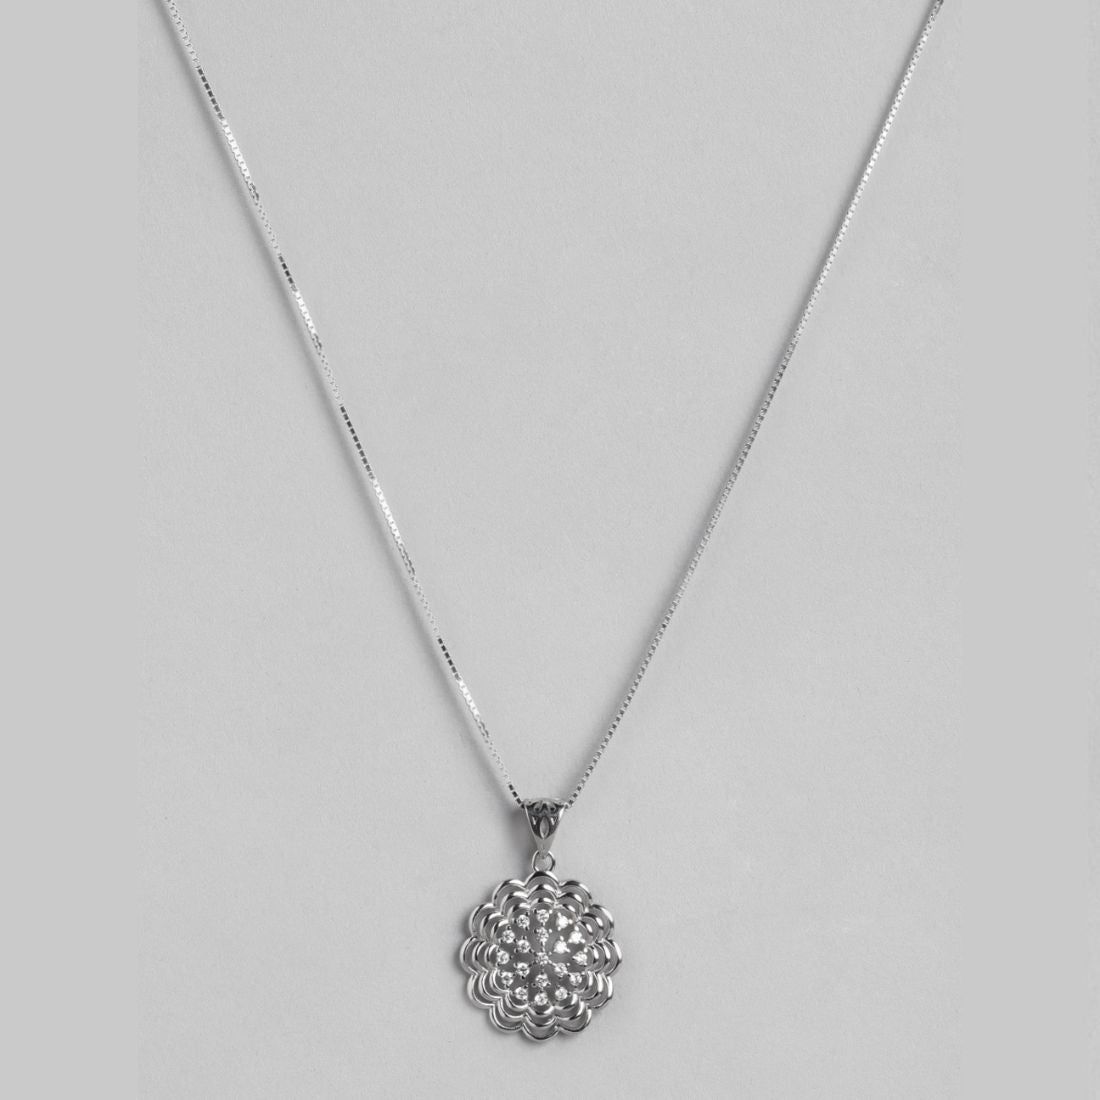 Timeless Elegance 925 Sterling Silver Rhodium Plated Pendant